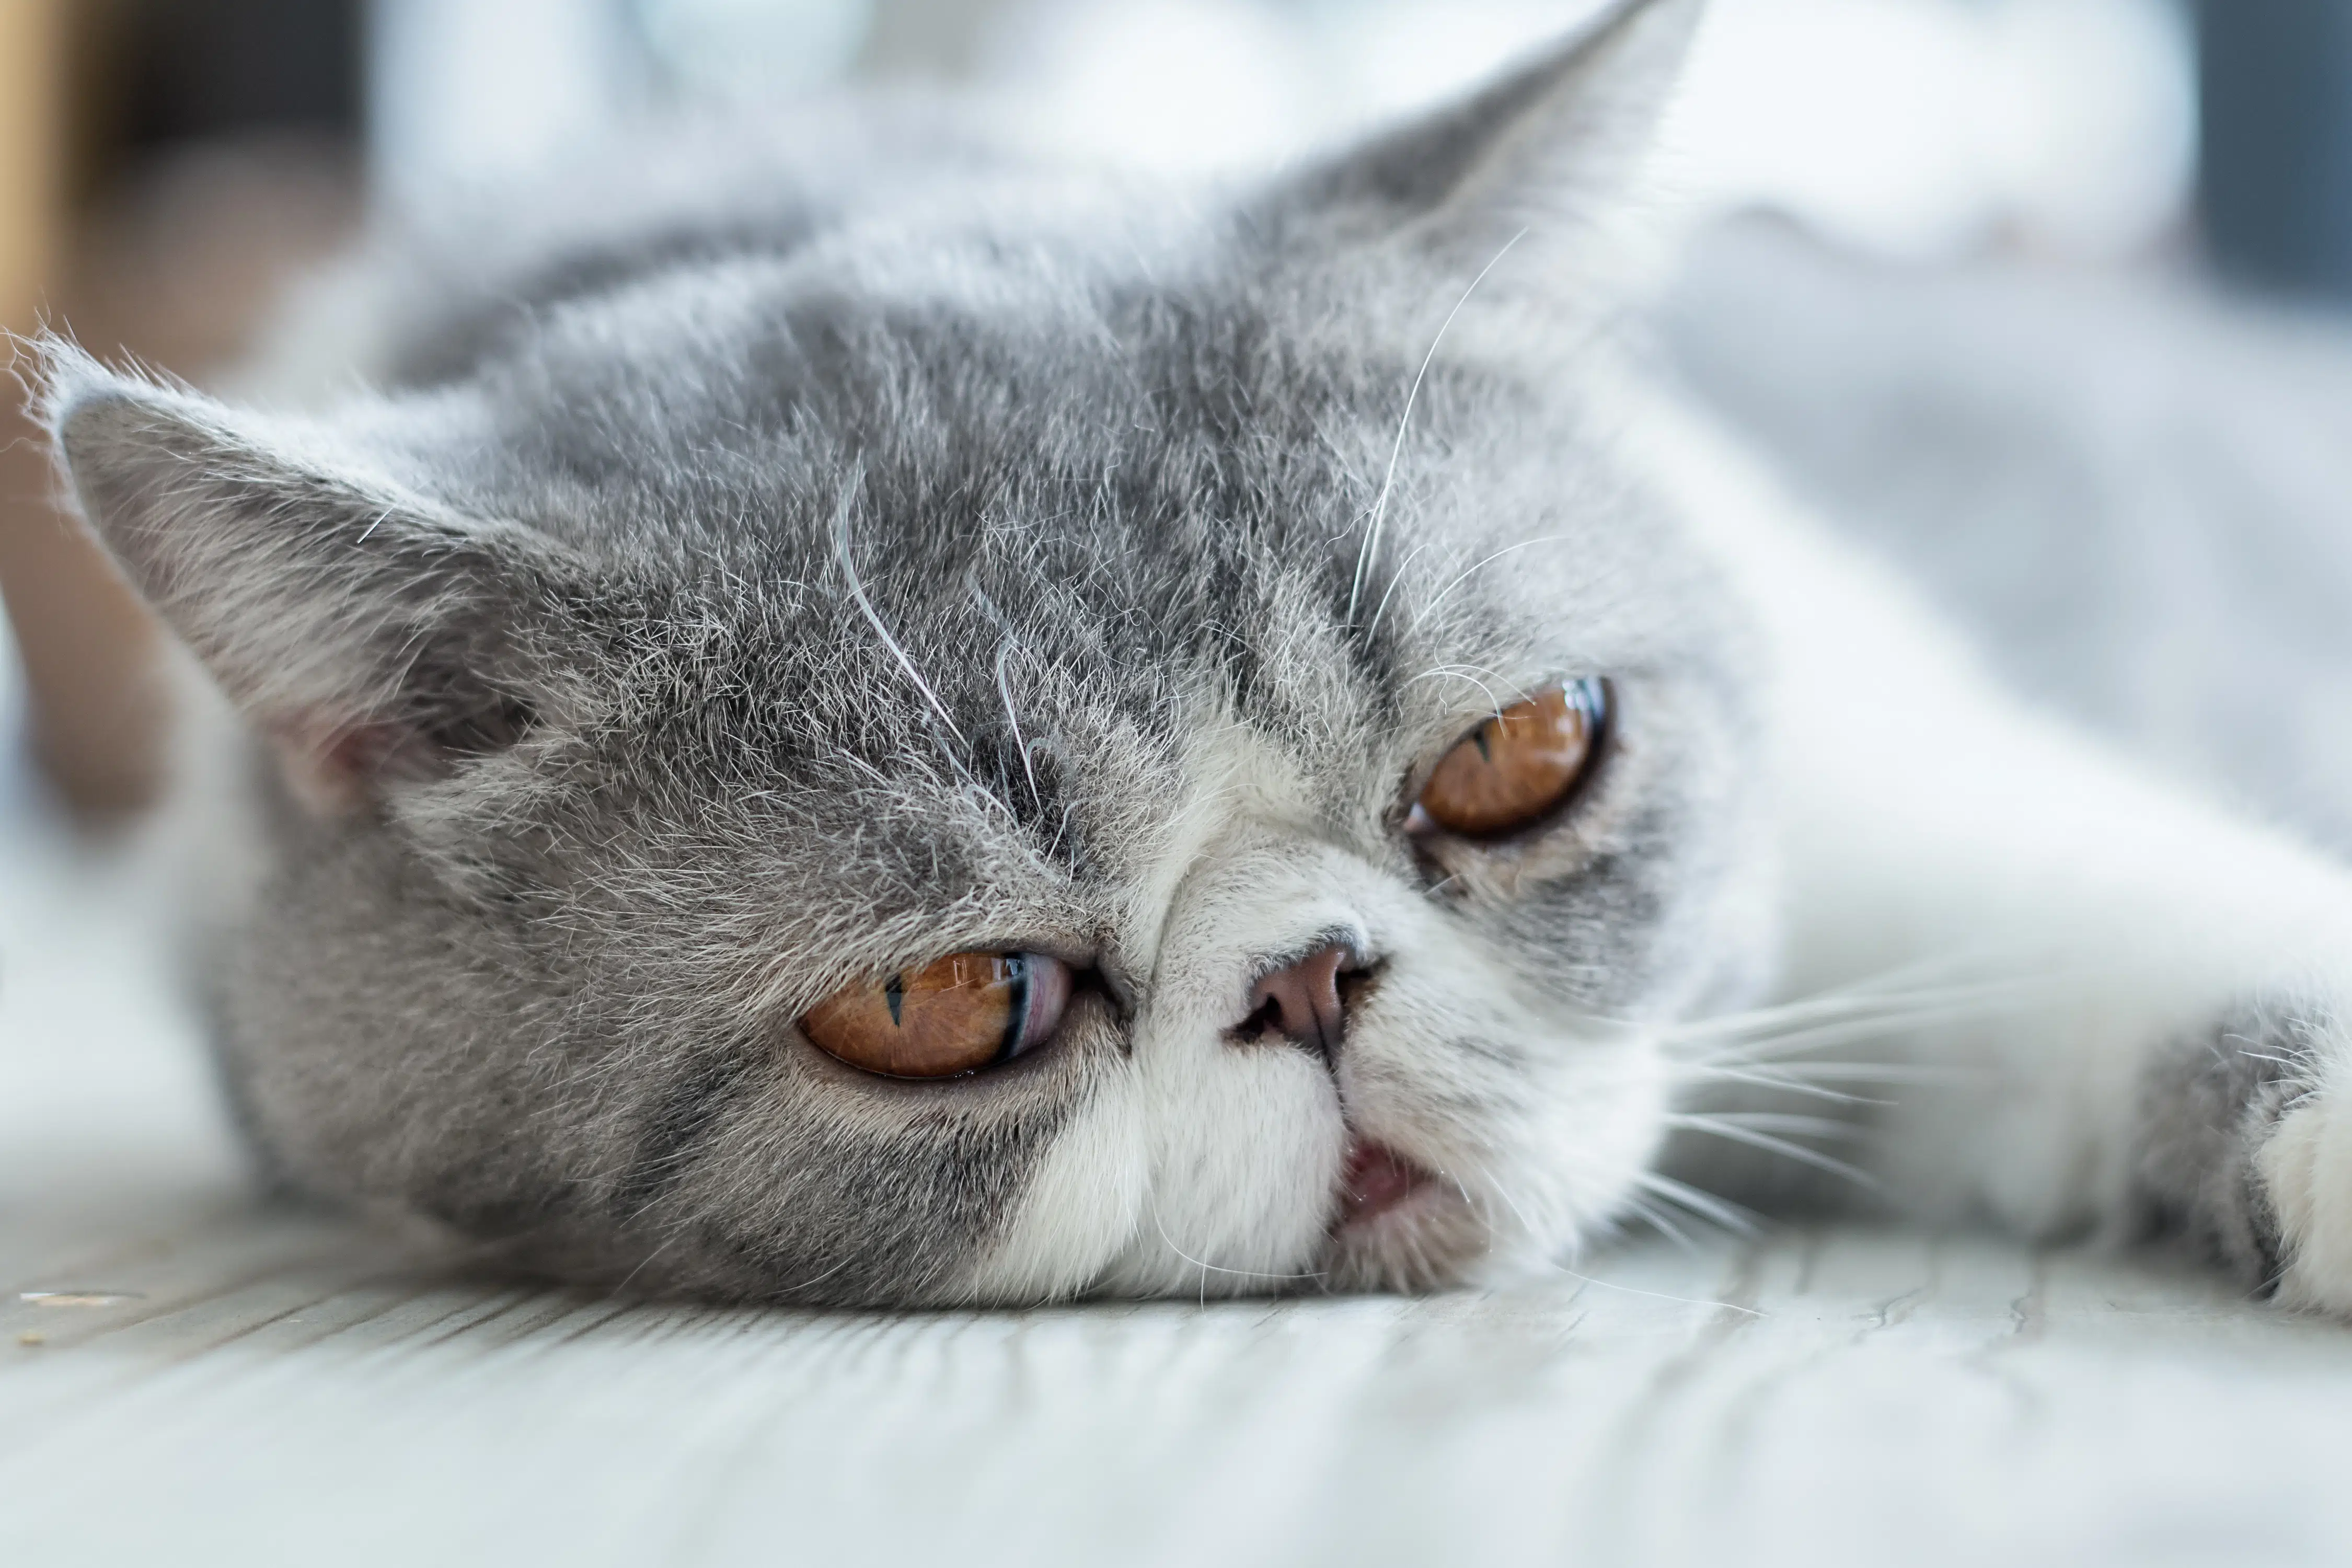 It's never a bad idea to add an exotic shorthair cat to your family, like this one lying on the floor.